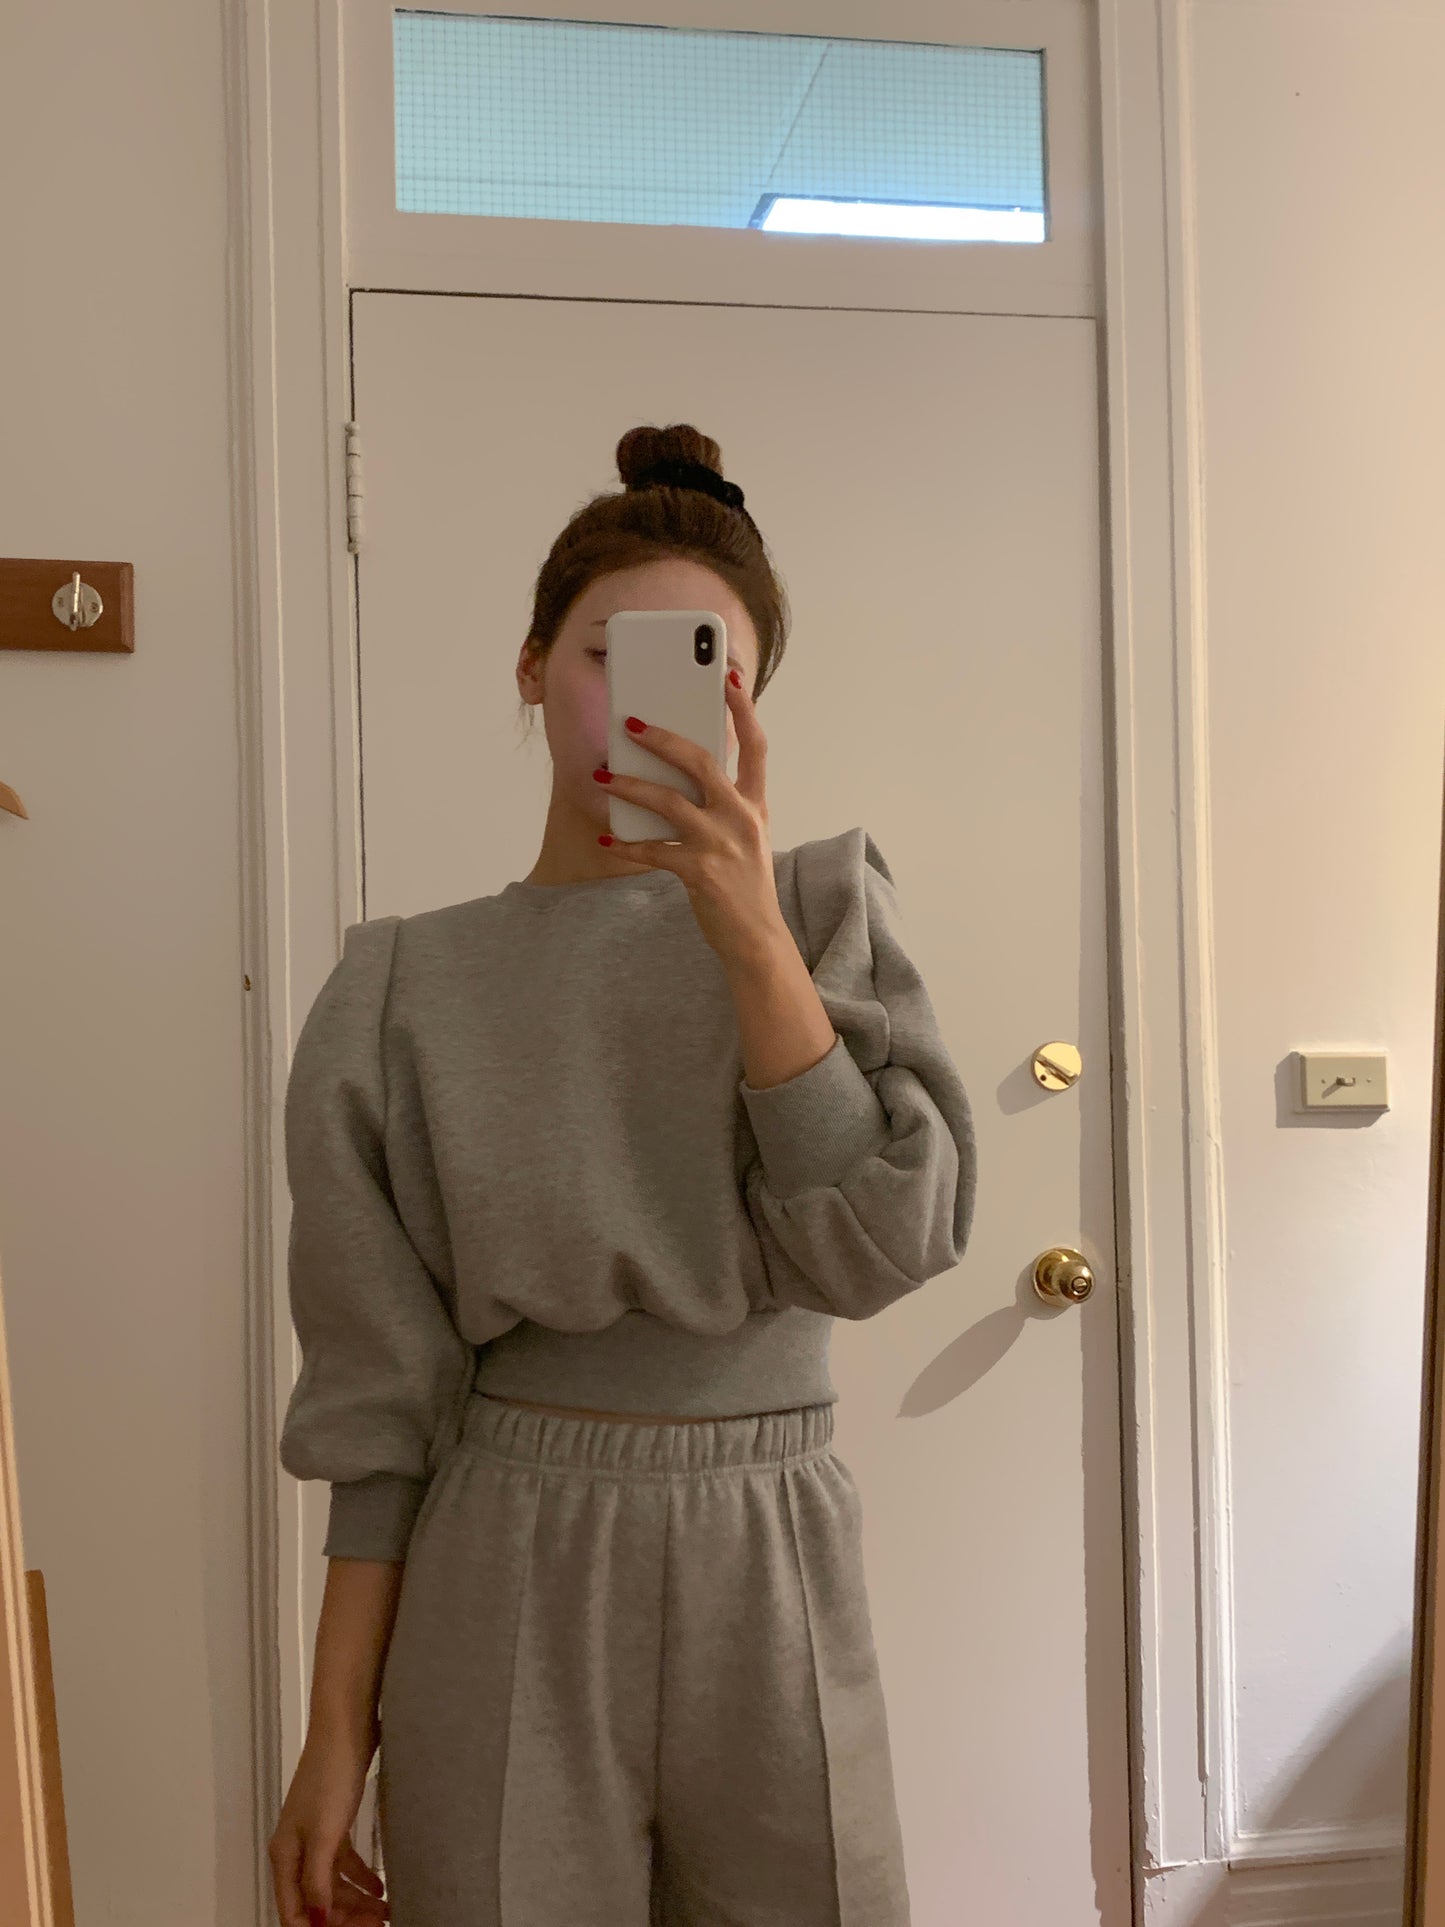 Fleece-lined Puff Cropped Set